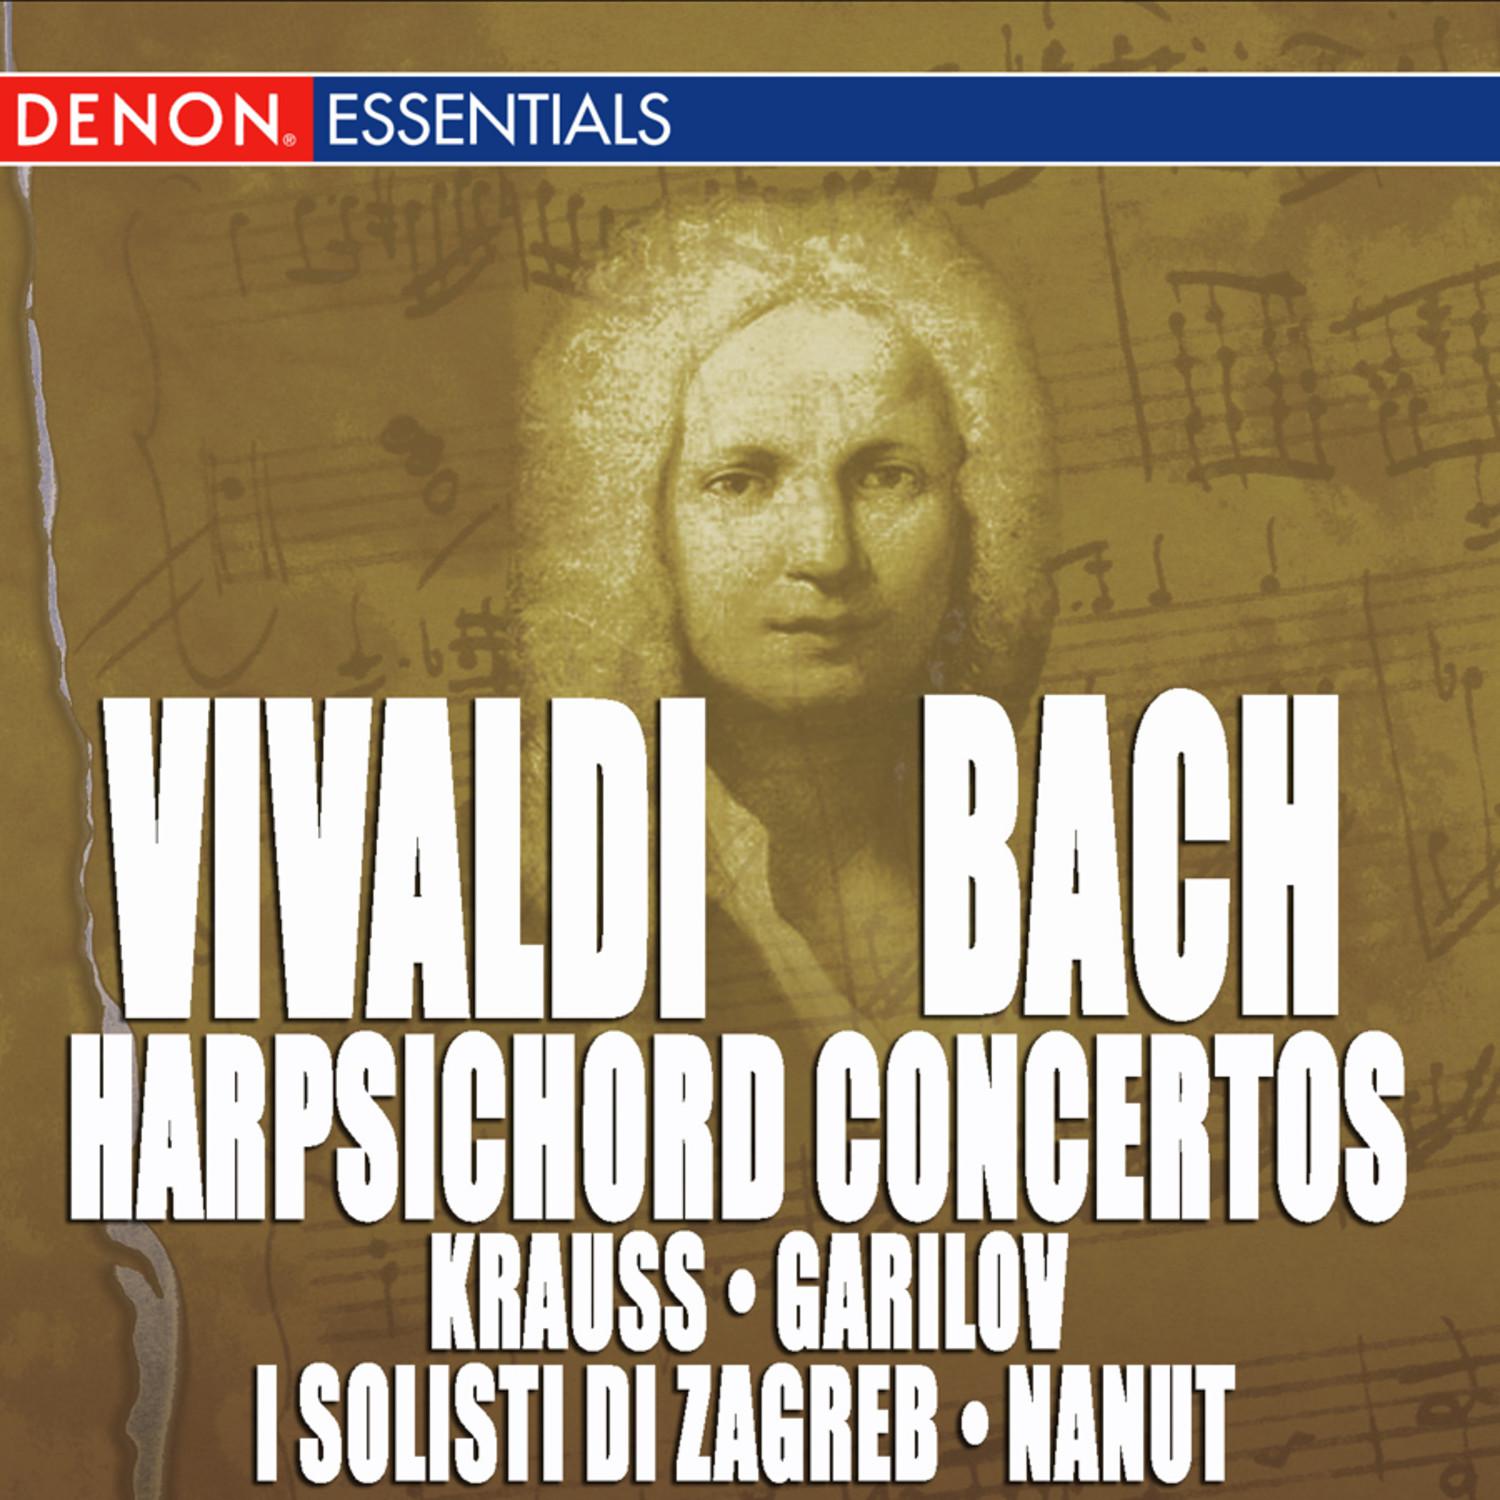 Concerto for Harpsichord and Orchestra in D Minor, BWV 1052: III. Allegro